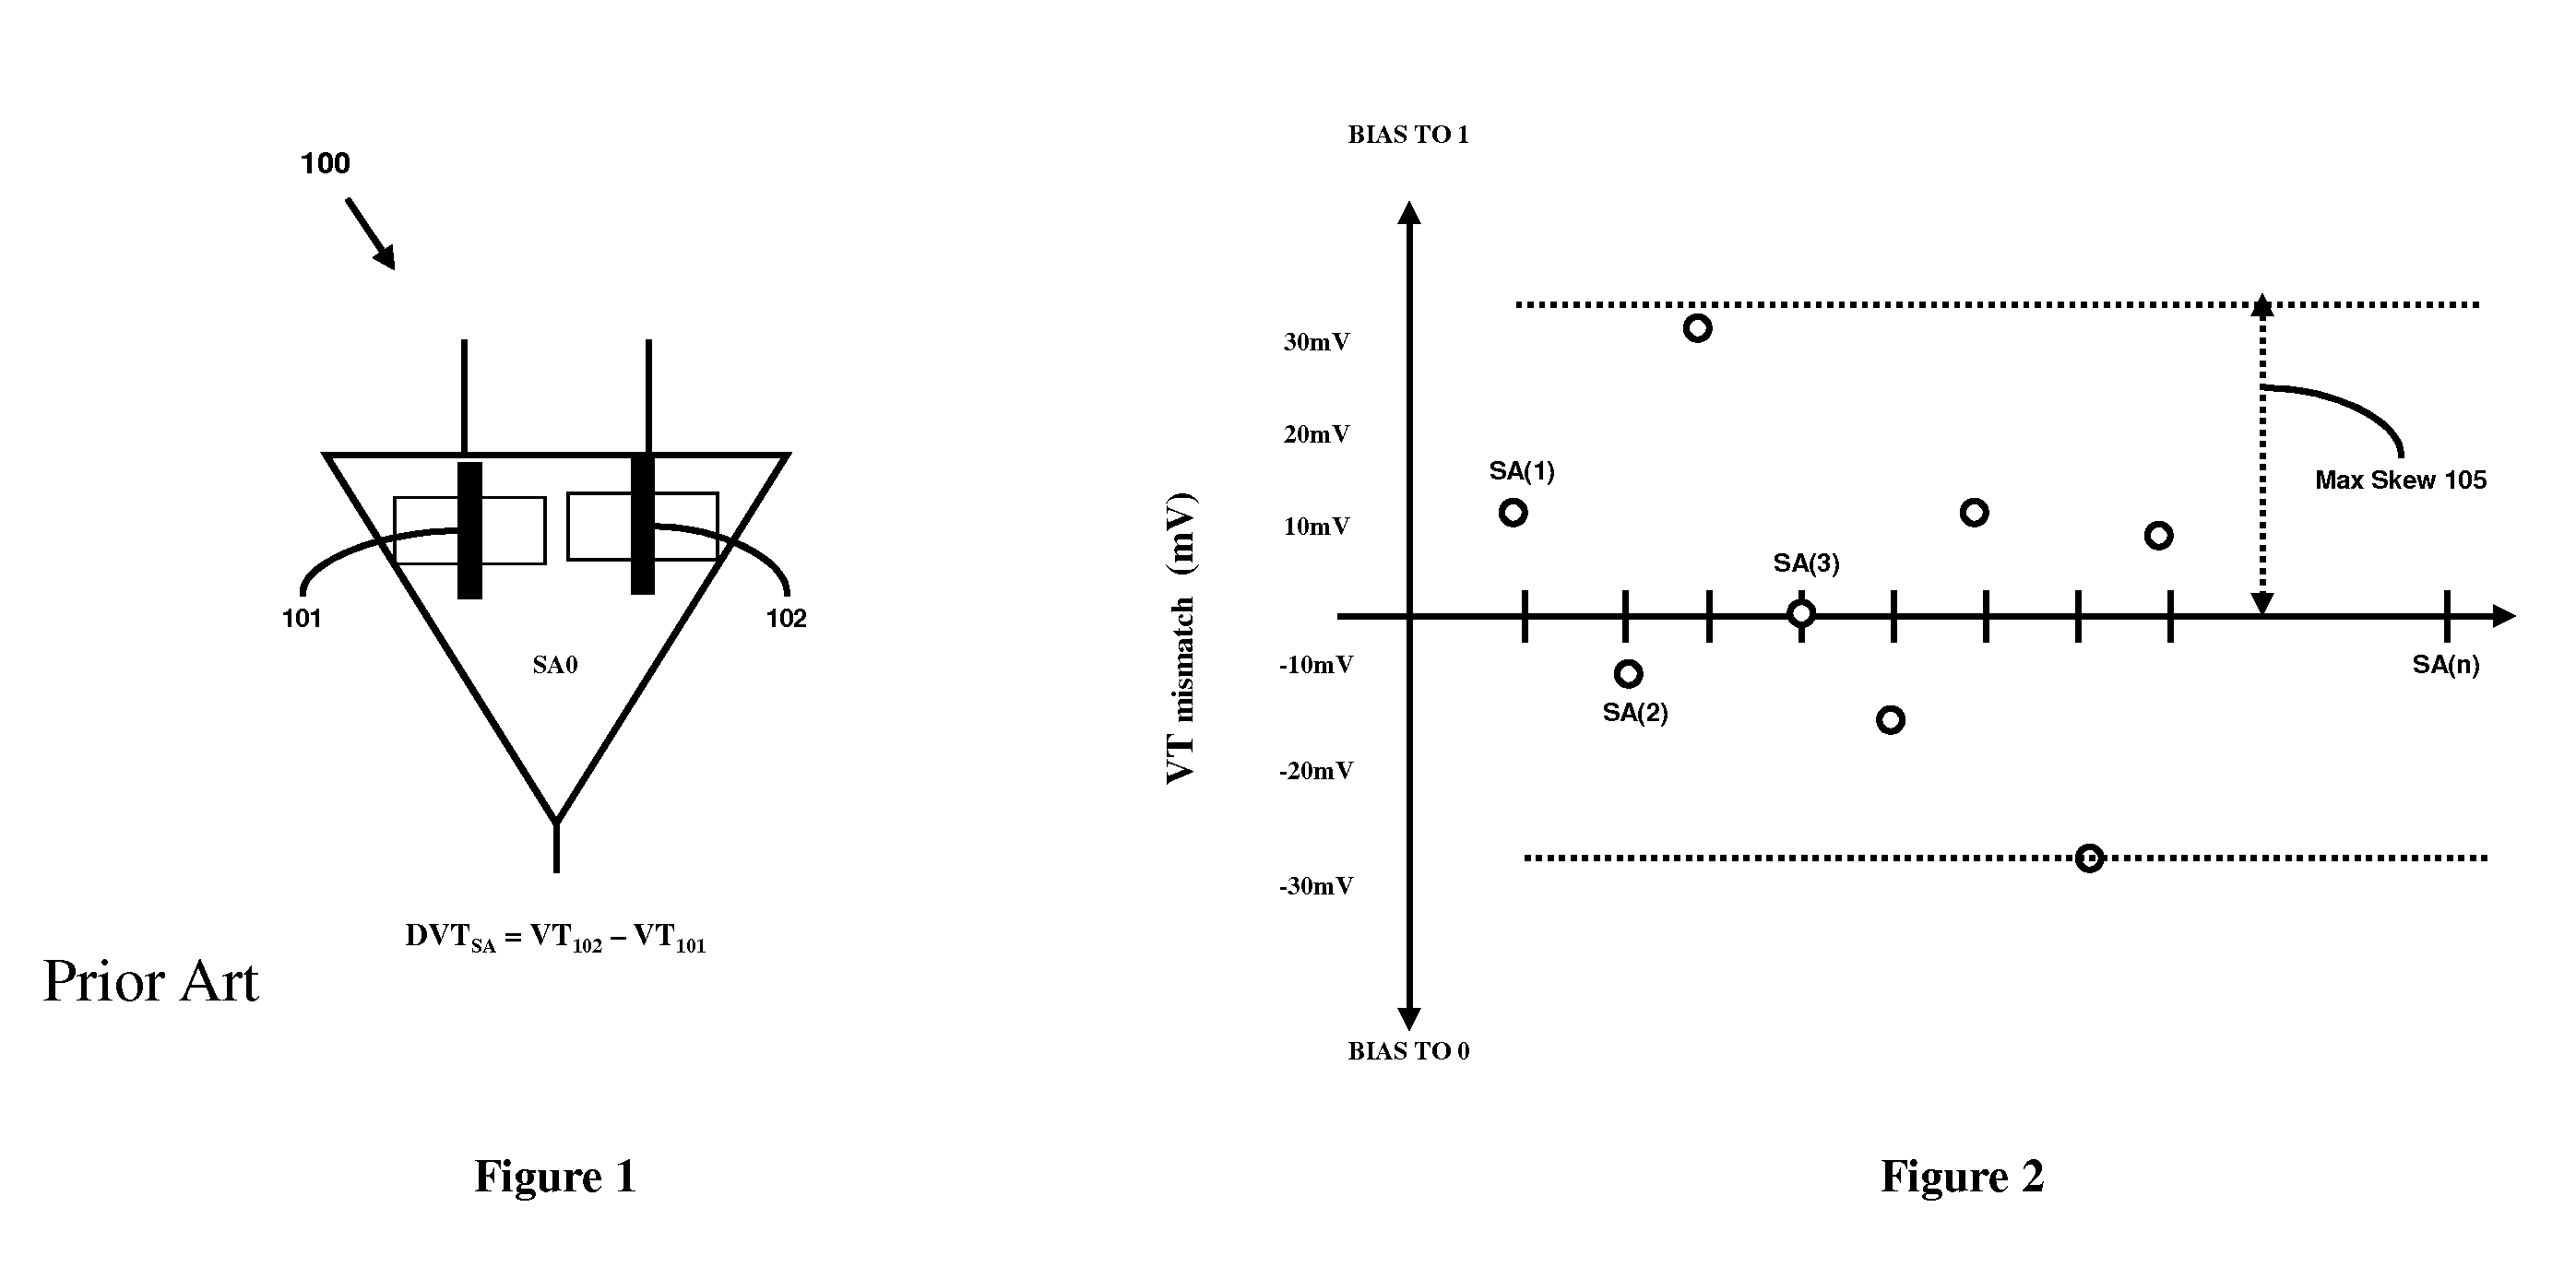 Device threshold calibration through state dependent burn-in